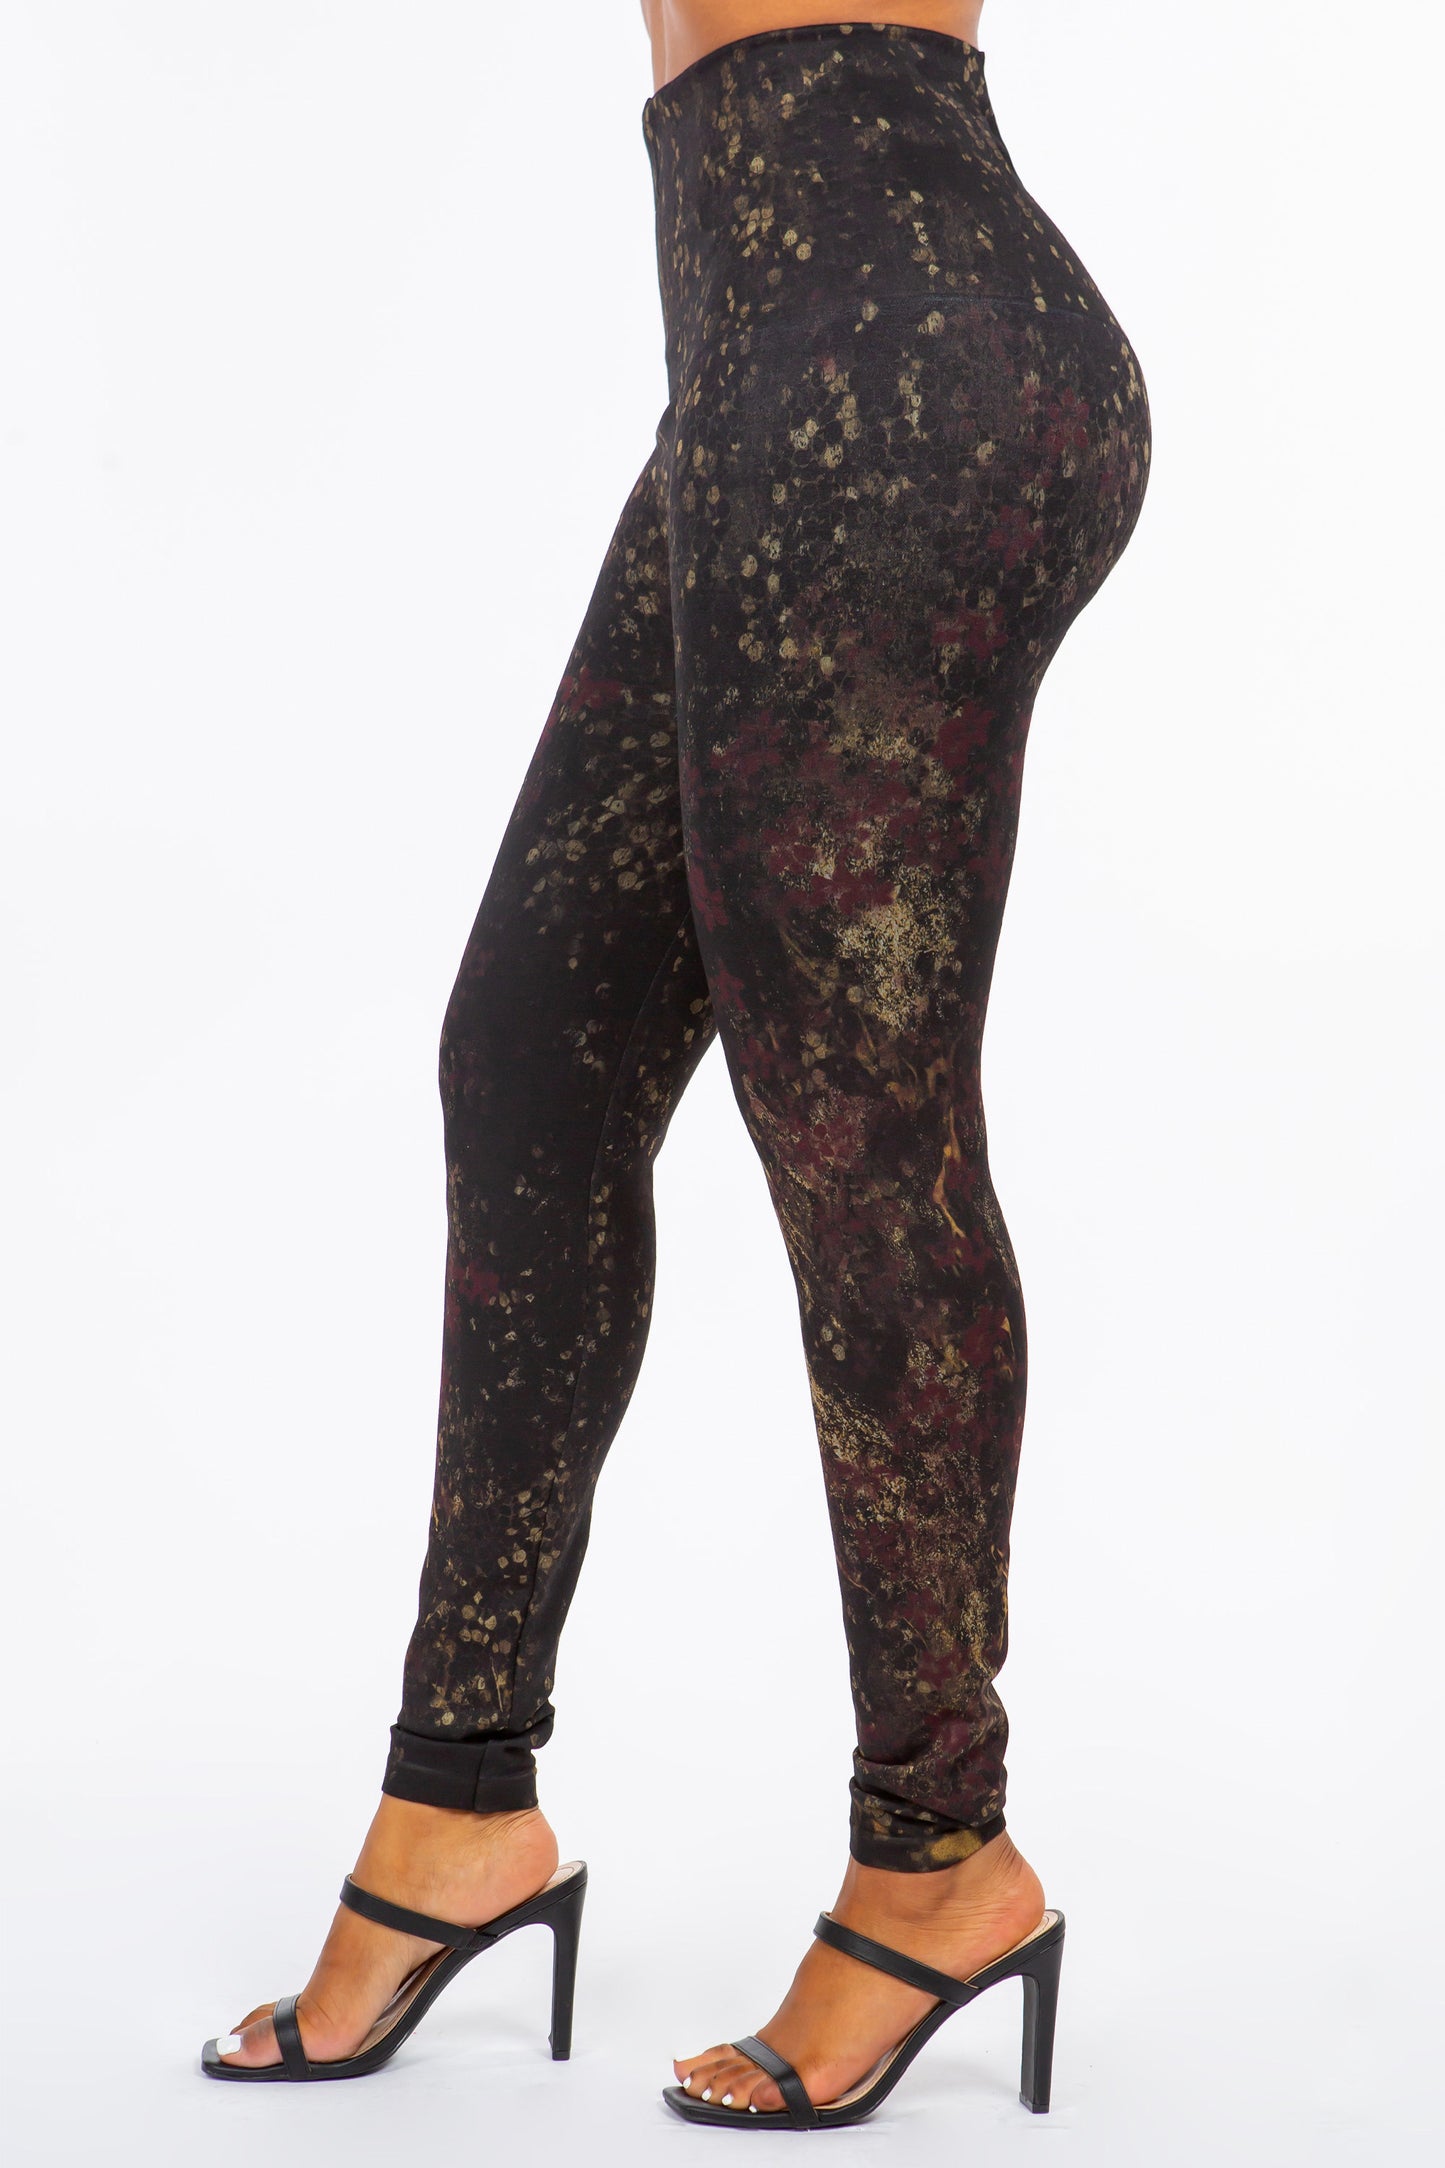 Glimmer Blossoms Printed Leggings in Pinot